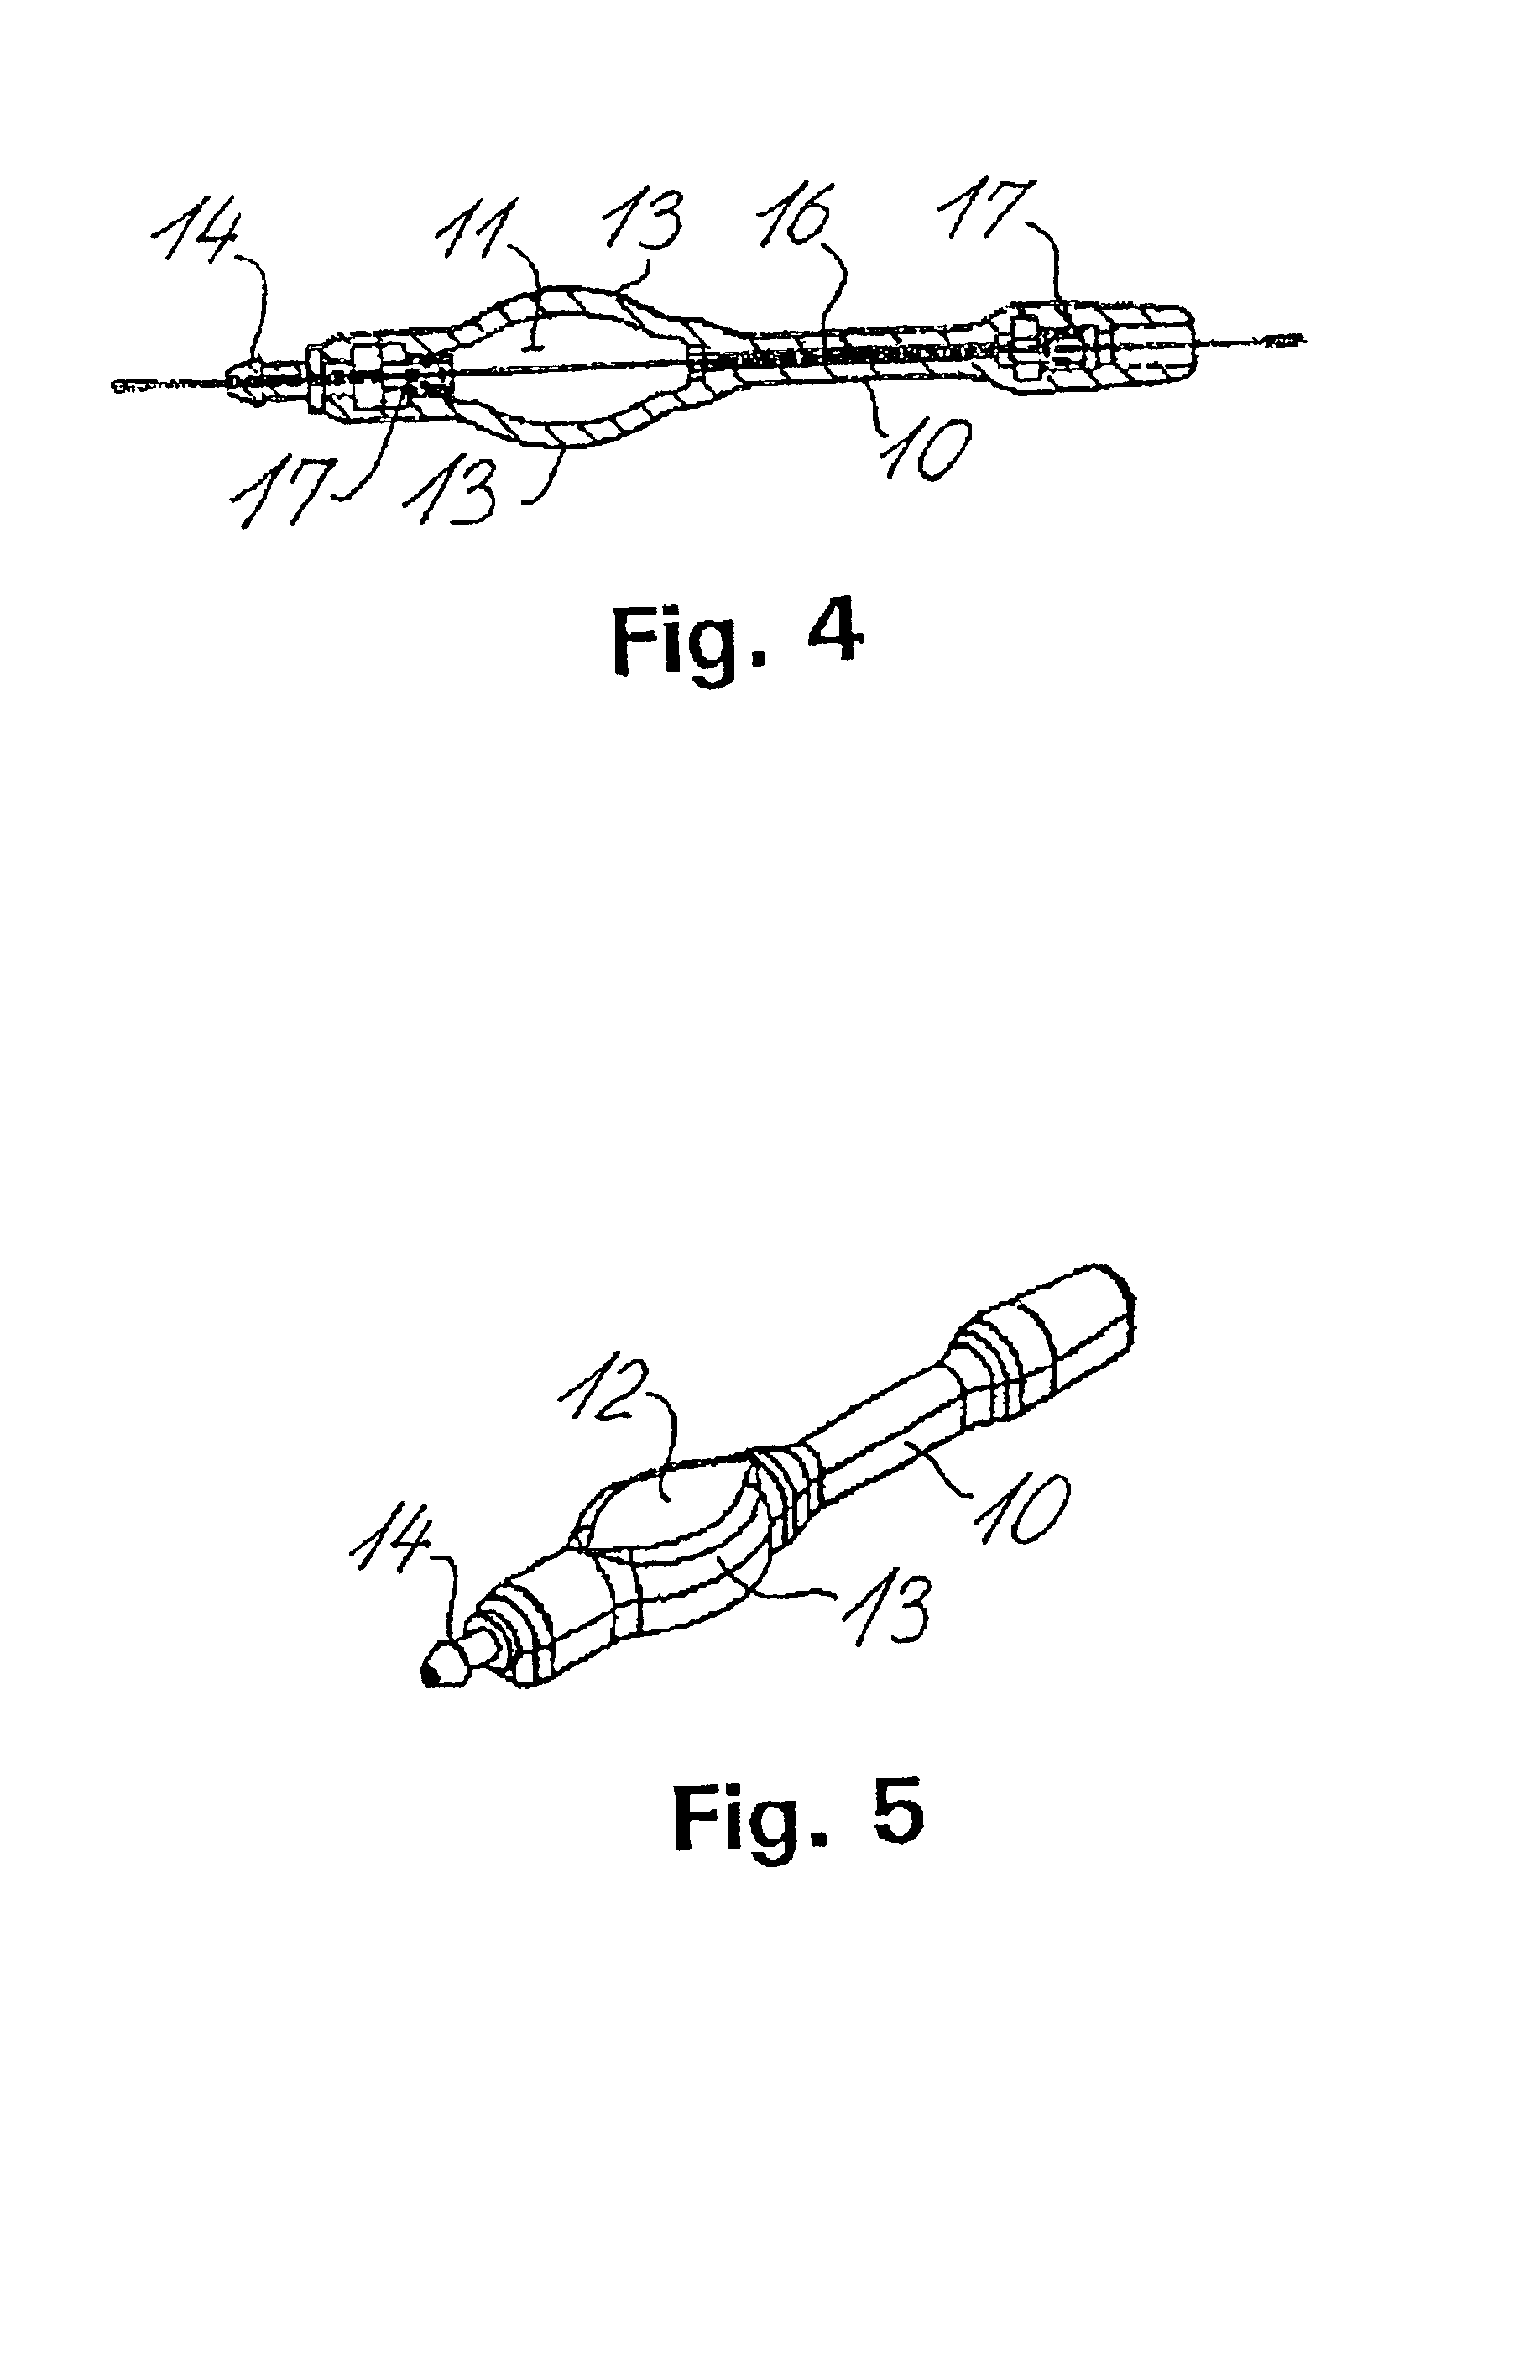 Fluid shunt system and a method for the treatment of hydrocephalus